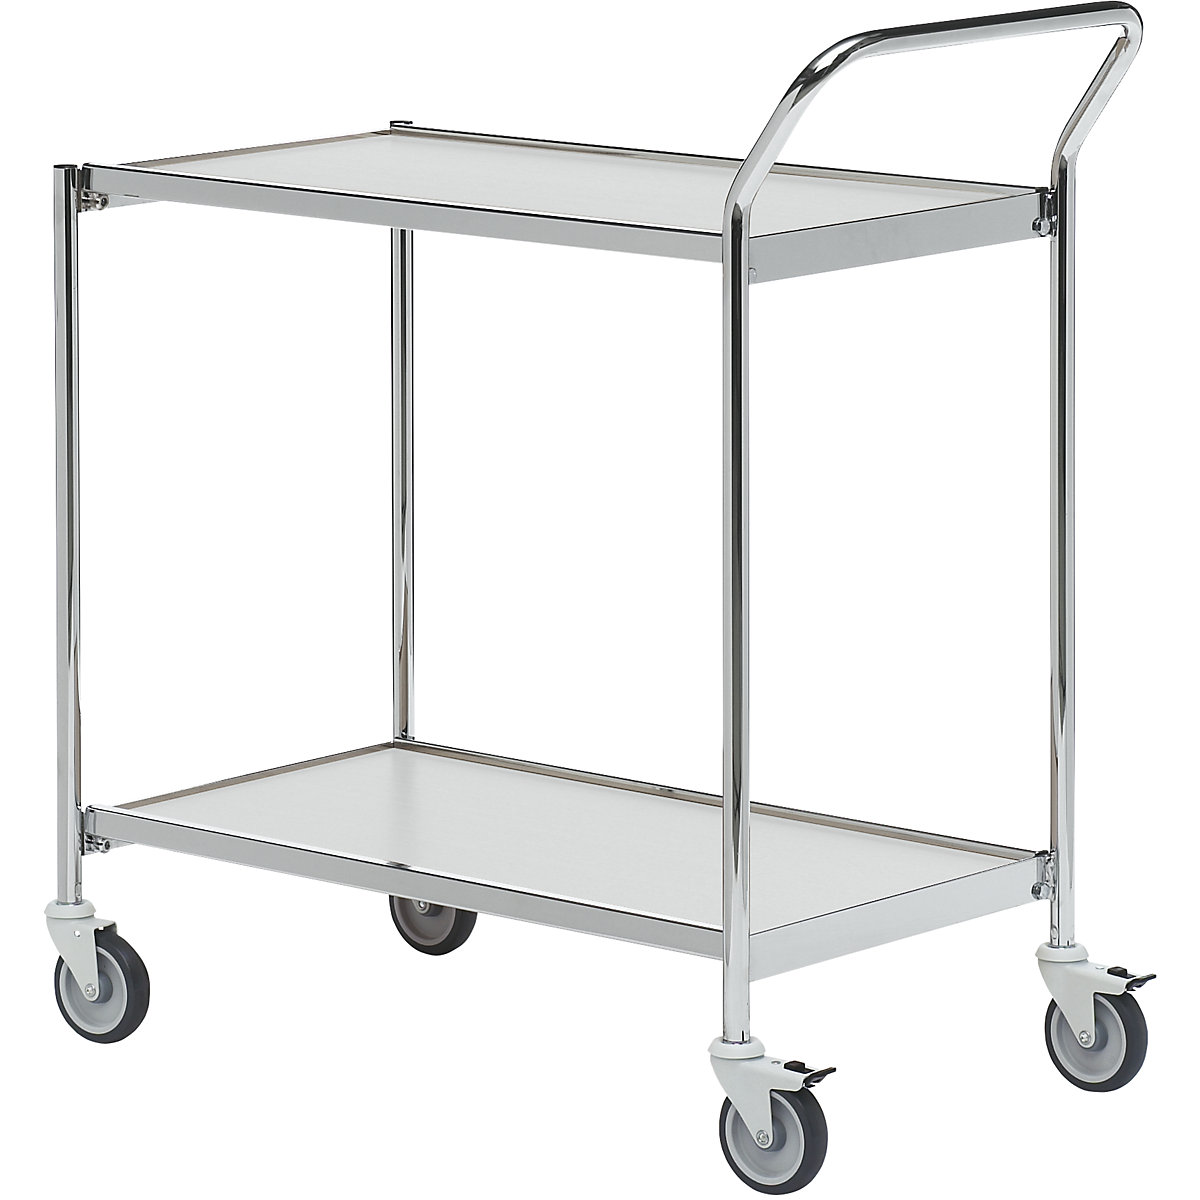 Table trolley – HelgeNyberg, 2 shelves, LxW 800 x 420 mm, chrome/grey, 5+ items-6